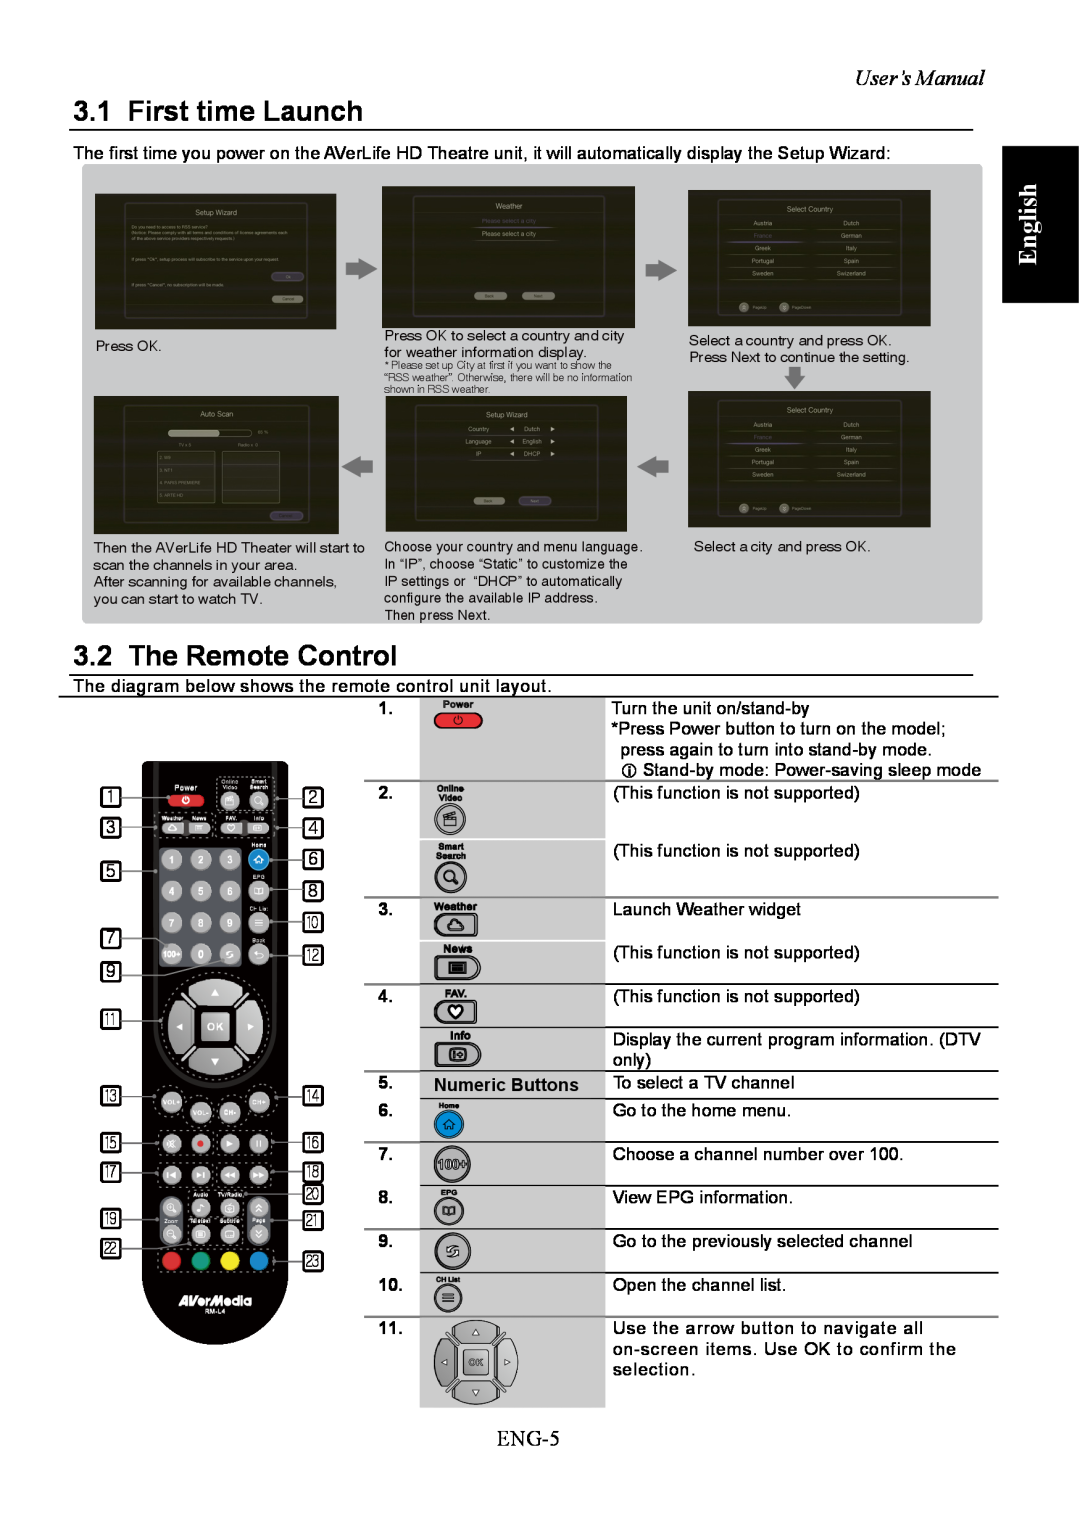 AVerMedia Technologies A211 user manual First time Launch, The Remote Control, English, User’s Manual, ENG-5 